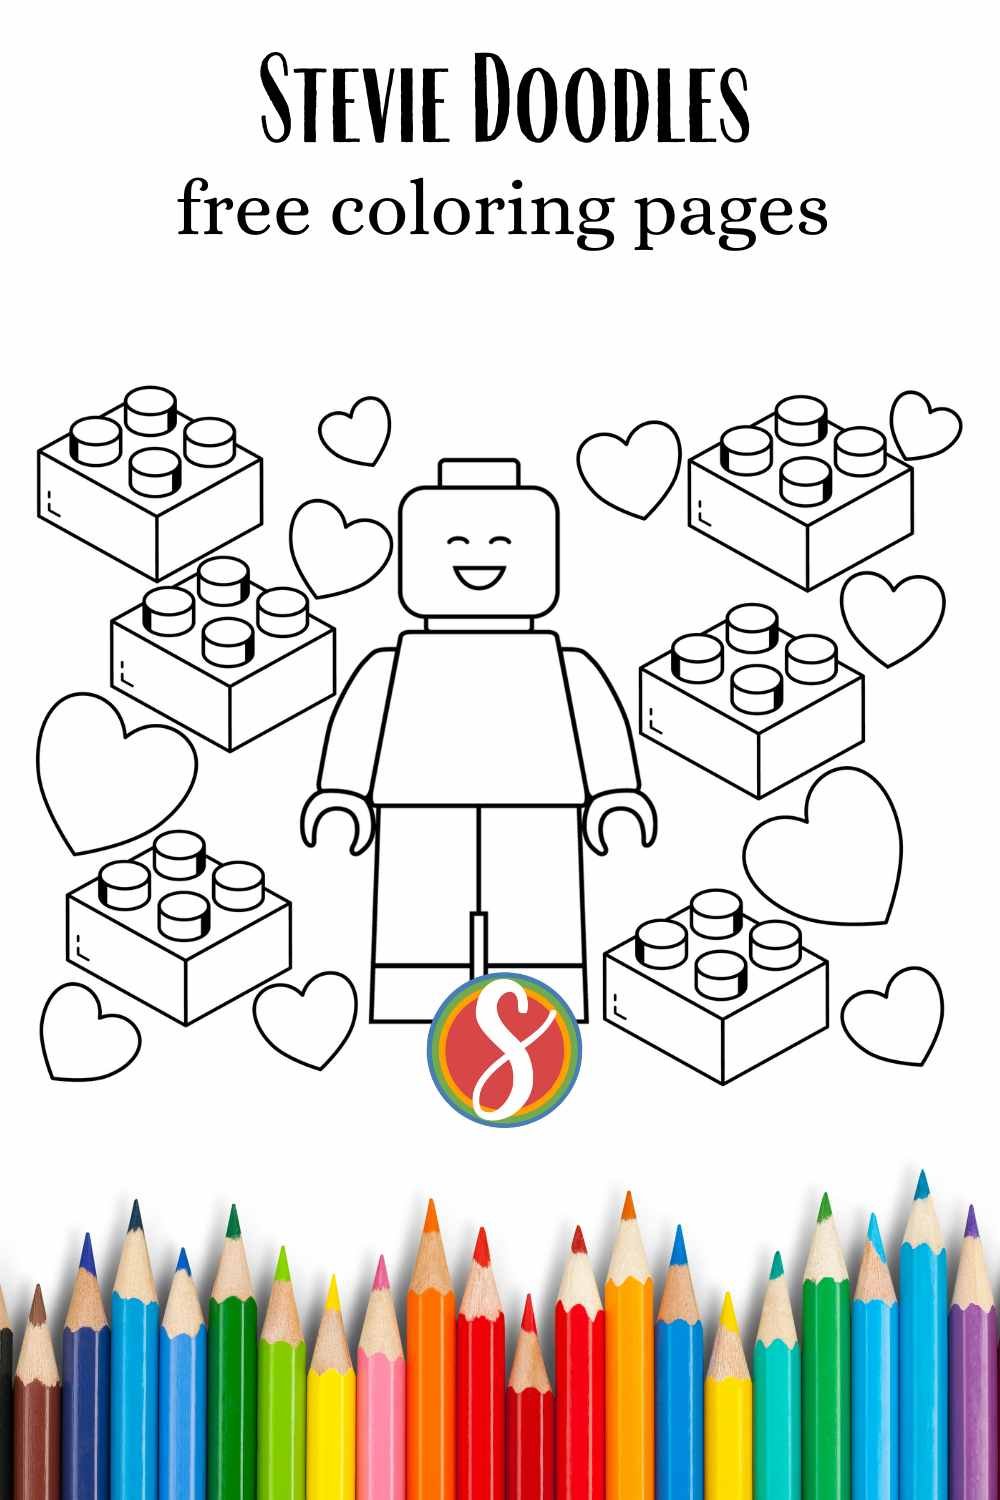 colorable lego centered surrounded by colorable lego bricks and hearts